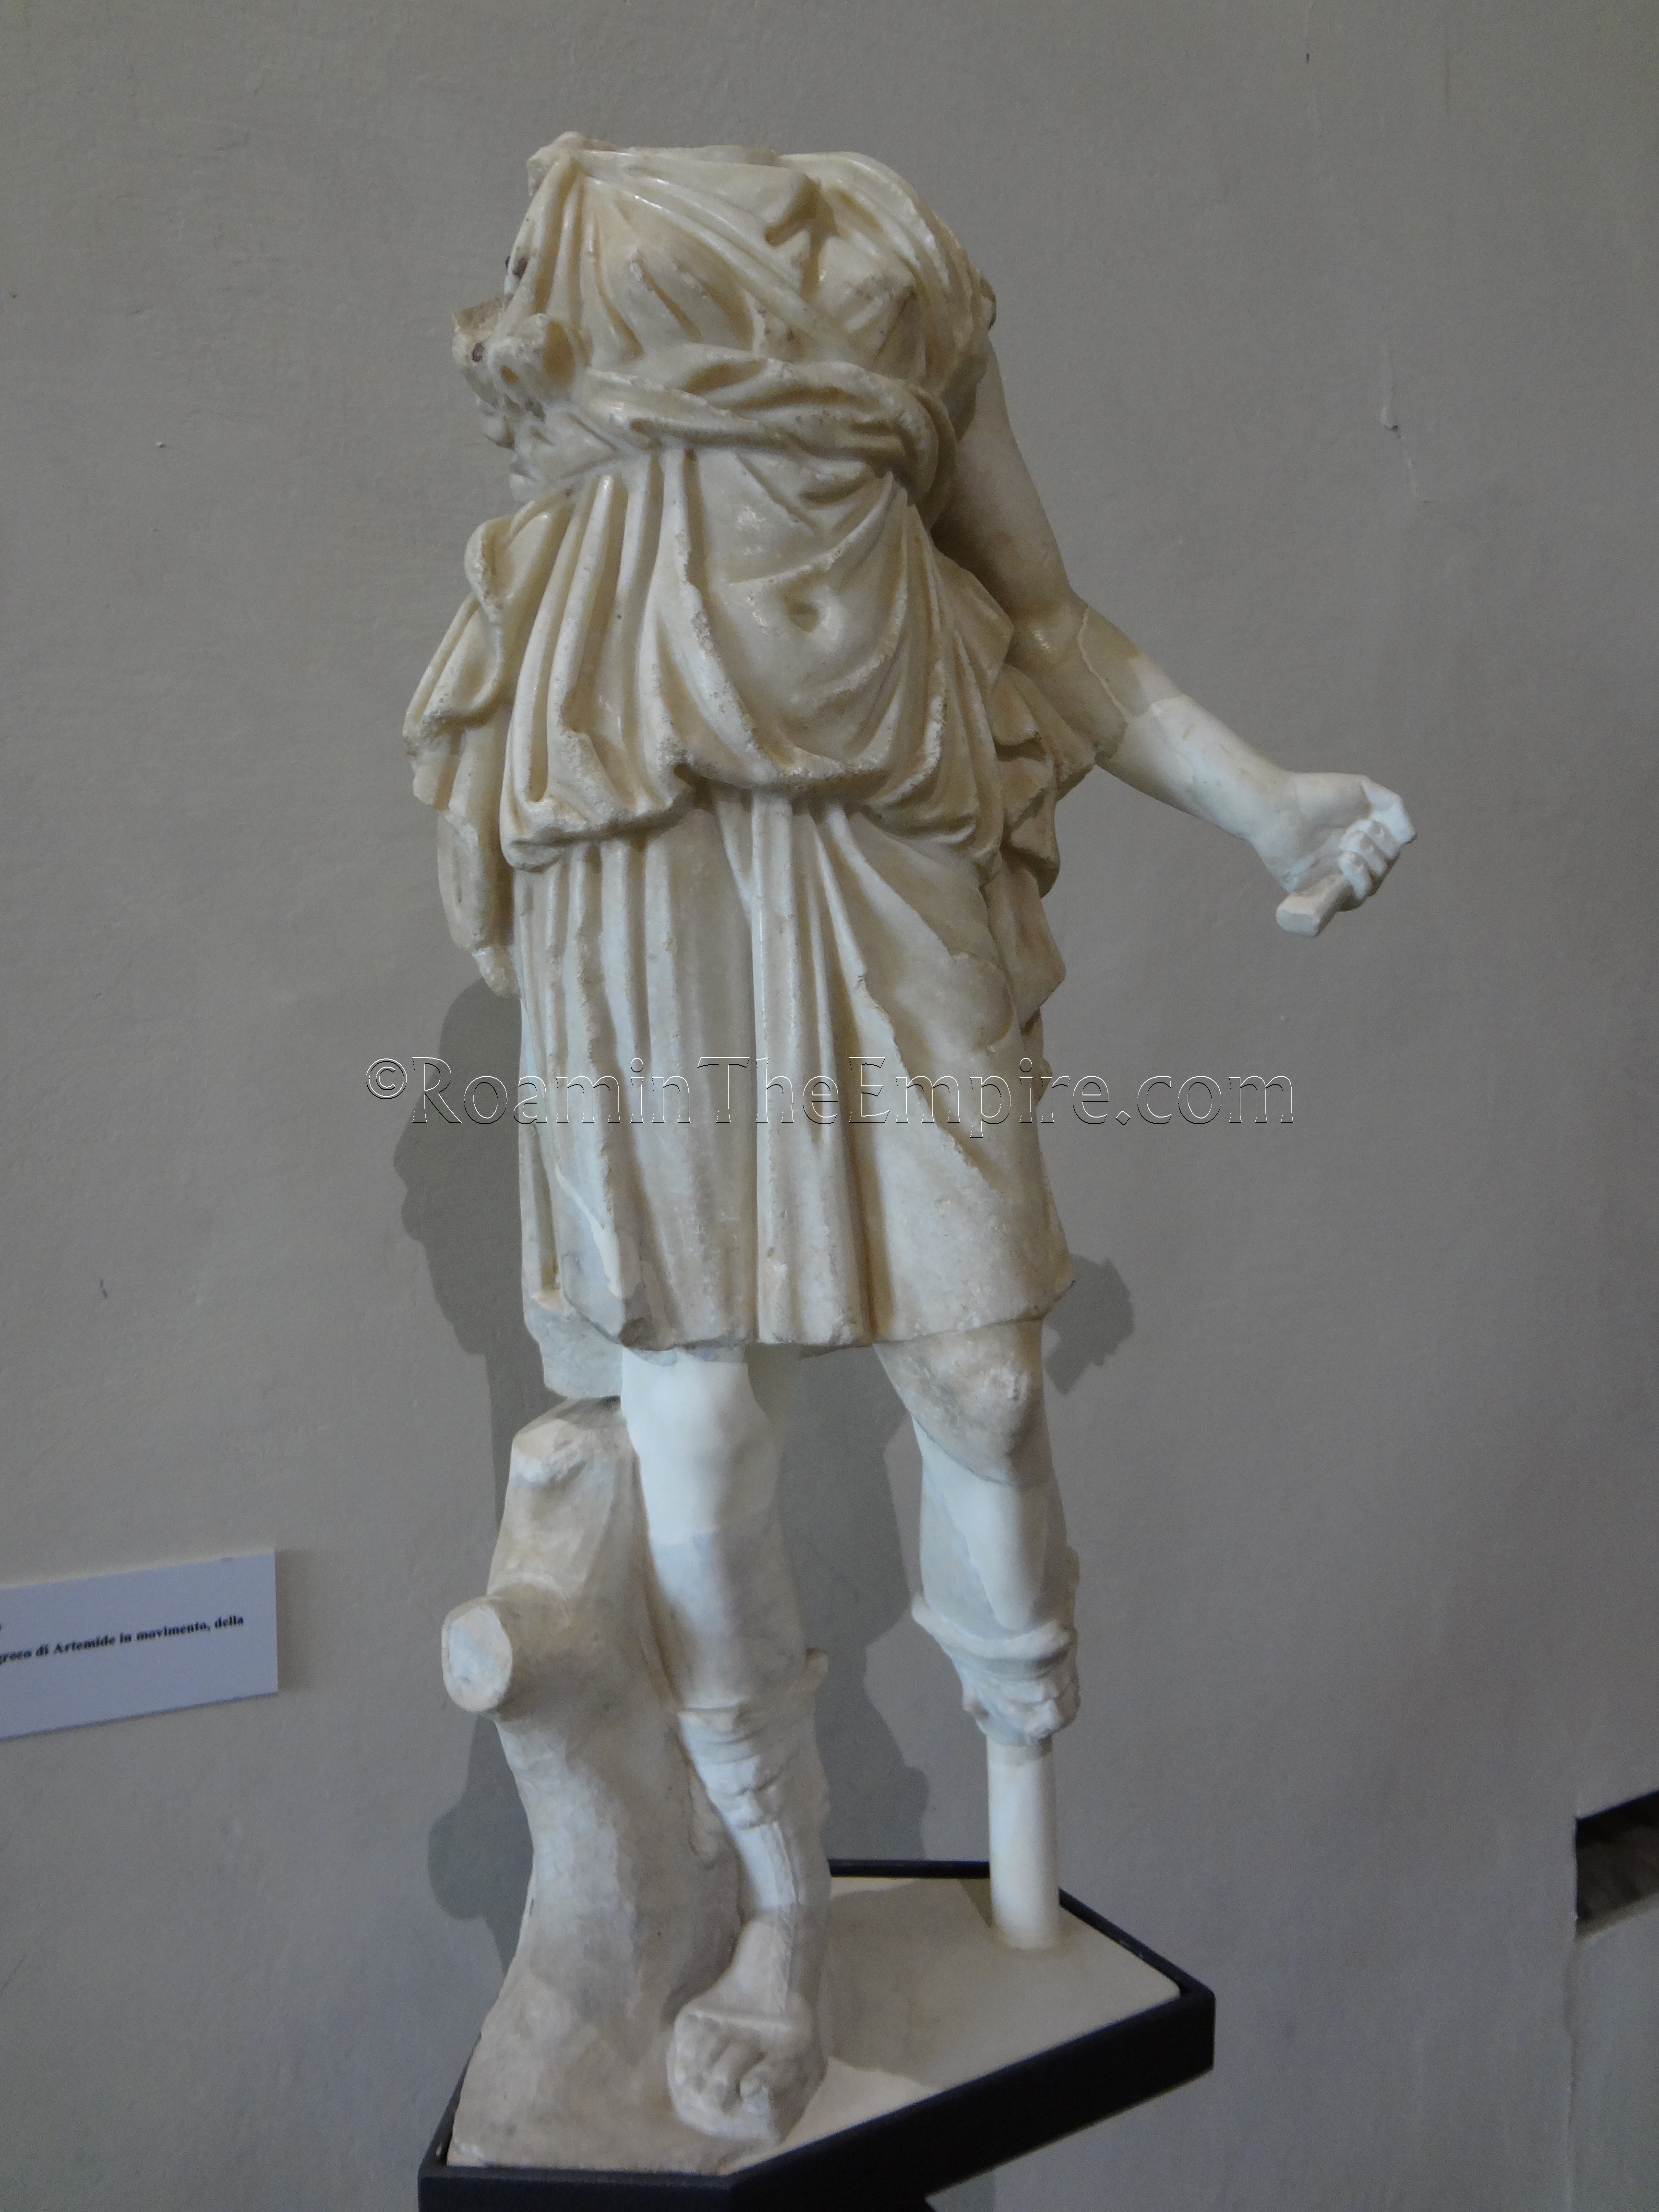 Statue of Artemis from the area of Arezzo, dated to the Antonine era.